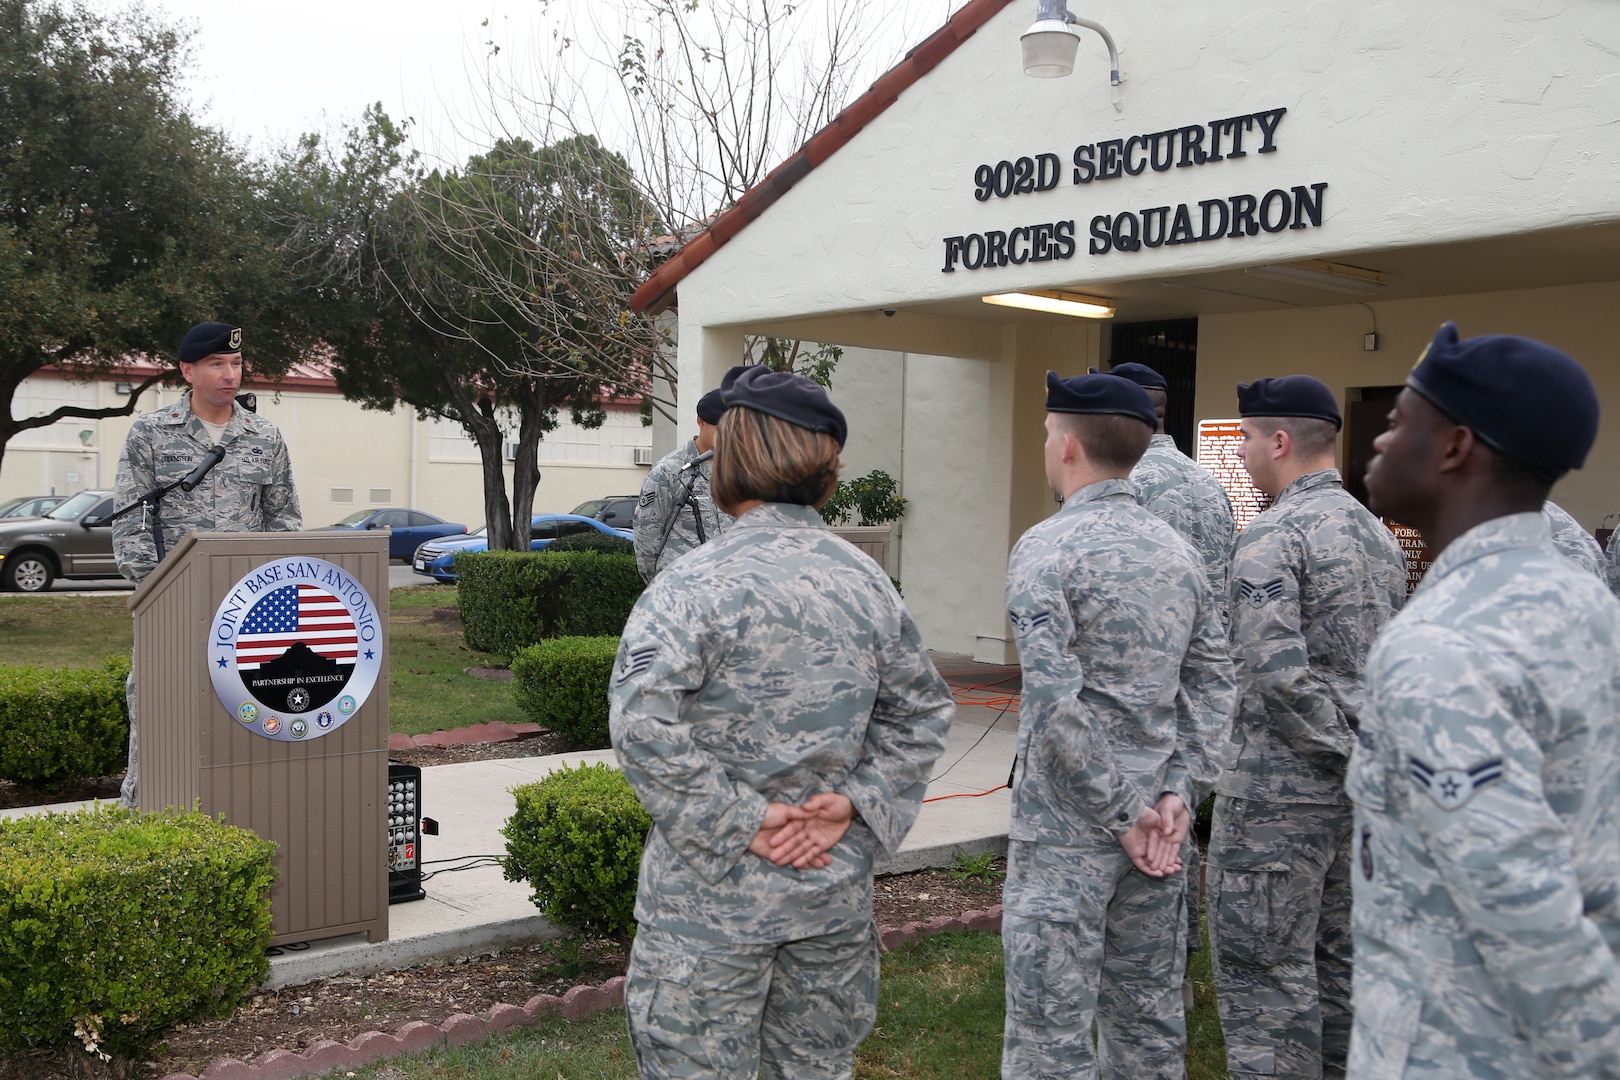 Airmen from the 902nd Security Forces Squadron attend the command dedication of their Operation Iraqi Freedom and Operation Enduring Freedom Defenders Wall Dec. 6. The memorial wall is in the 902nd SFS building at Joint Base San Antonio-Randolph honoring nine fallen Airman. (U.S. Air Force photo by Joshua Rodriguez)